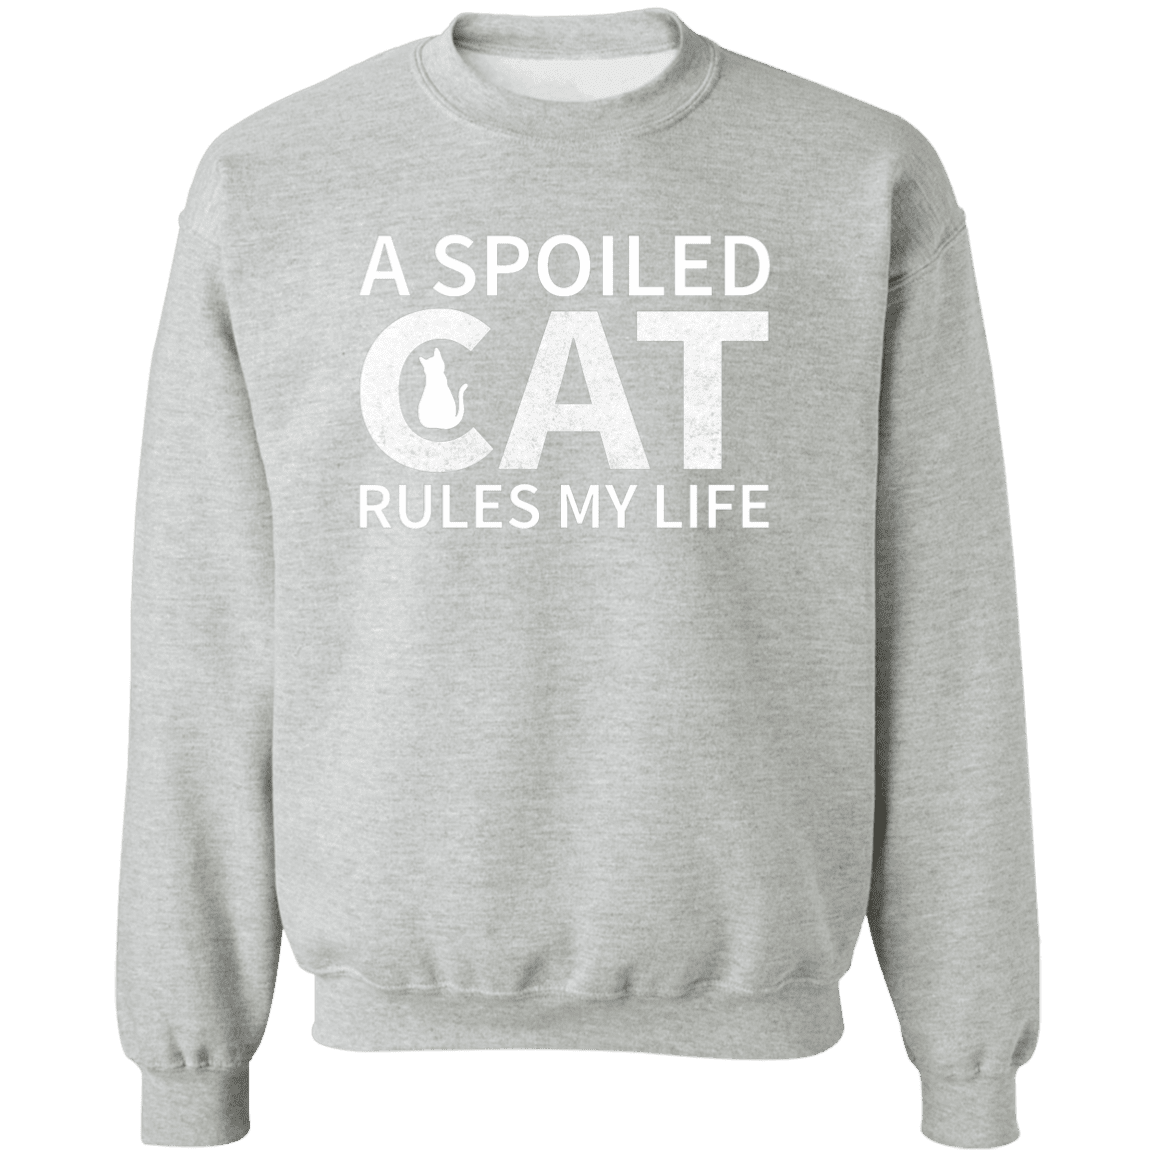 A Spoiled Cat Rules My Life - Sweatshirt.